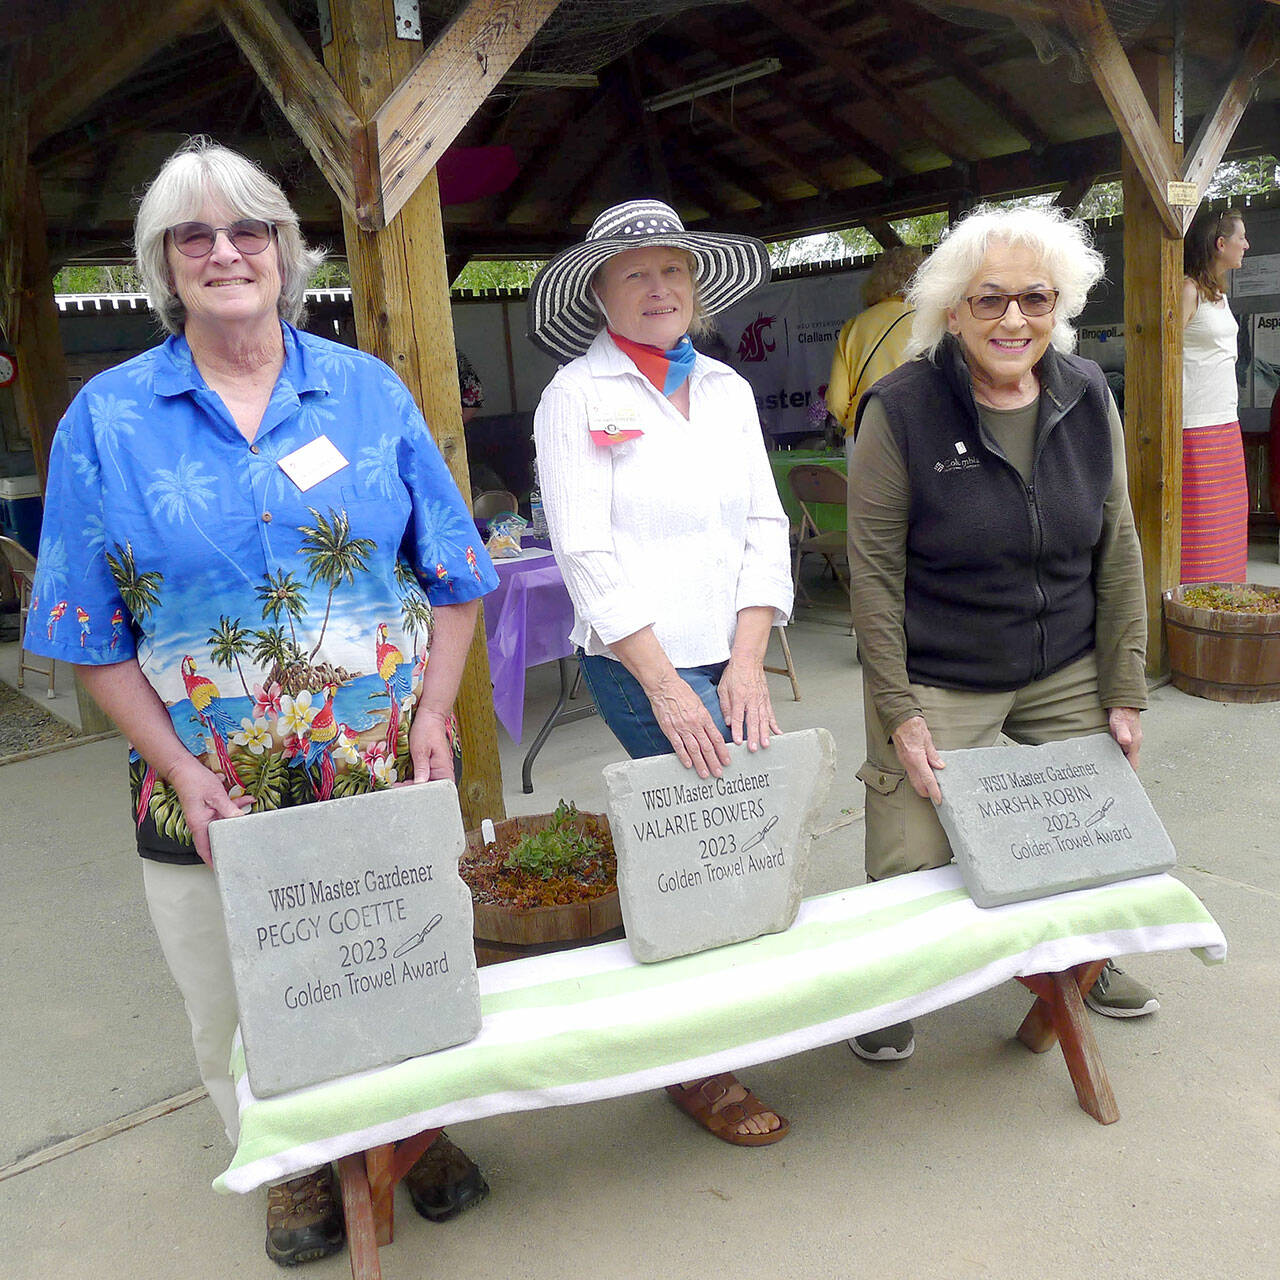 Master gardeners, left to right, Peggy Goette, Valarie Bowers and Marsha Robin received Golden Trowel awards.